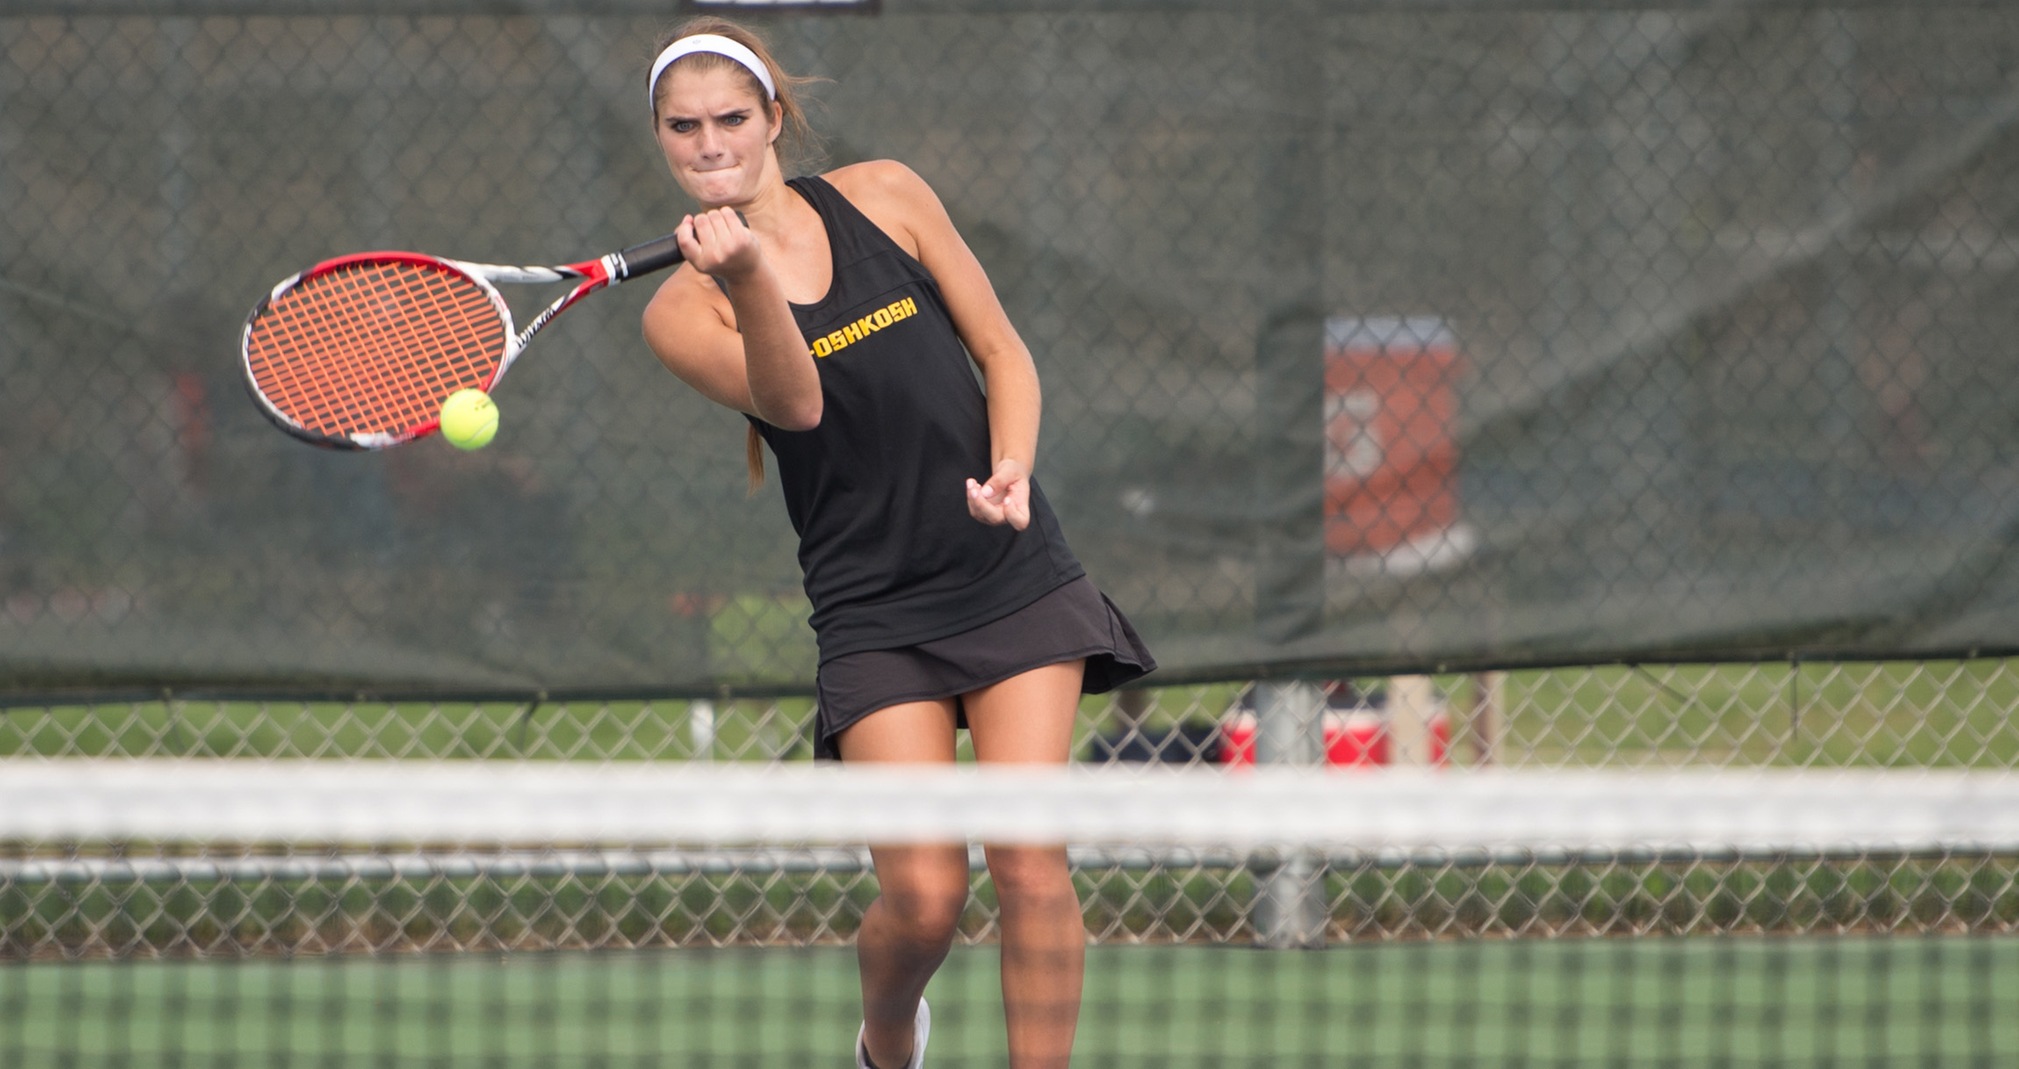 Alyssa Leffler won two singles contests and teamed with Samantha Koppa to win three doubles matches at the ITA Midwest Regional.